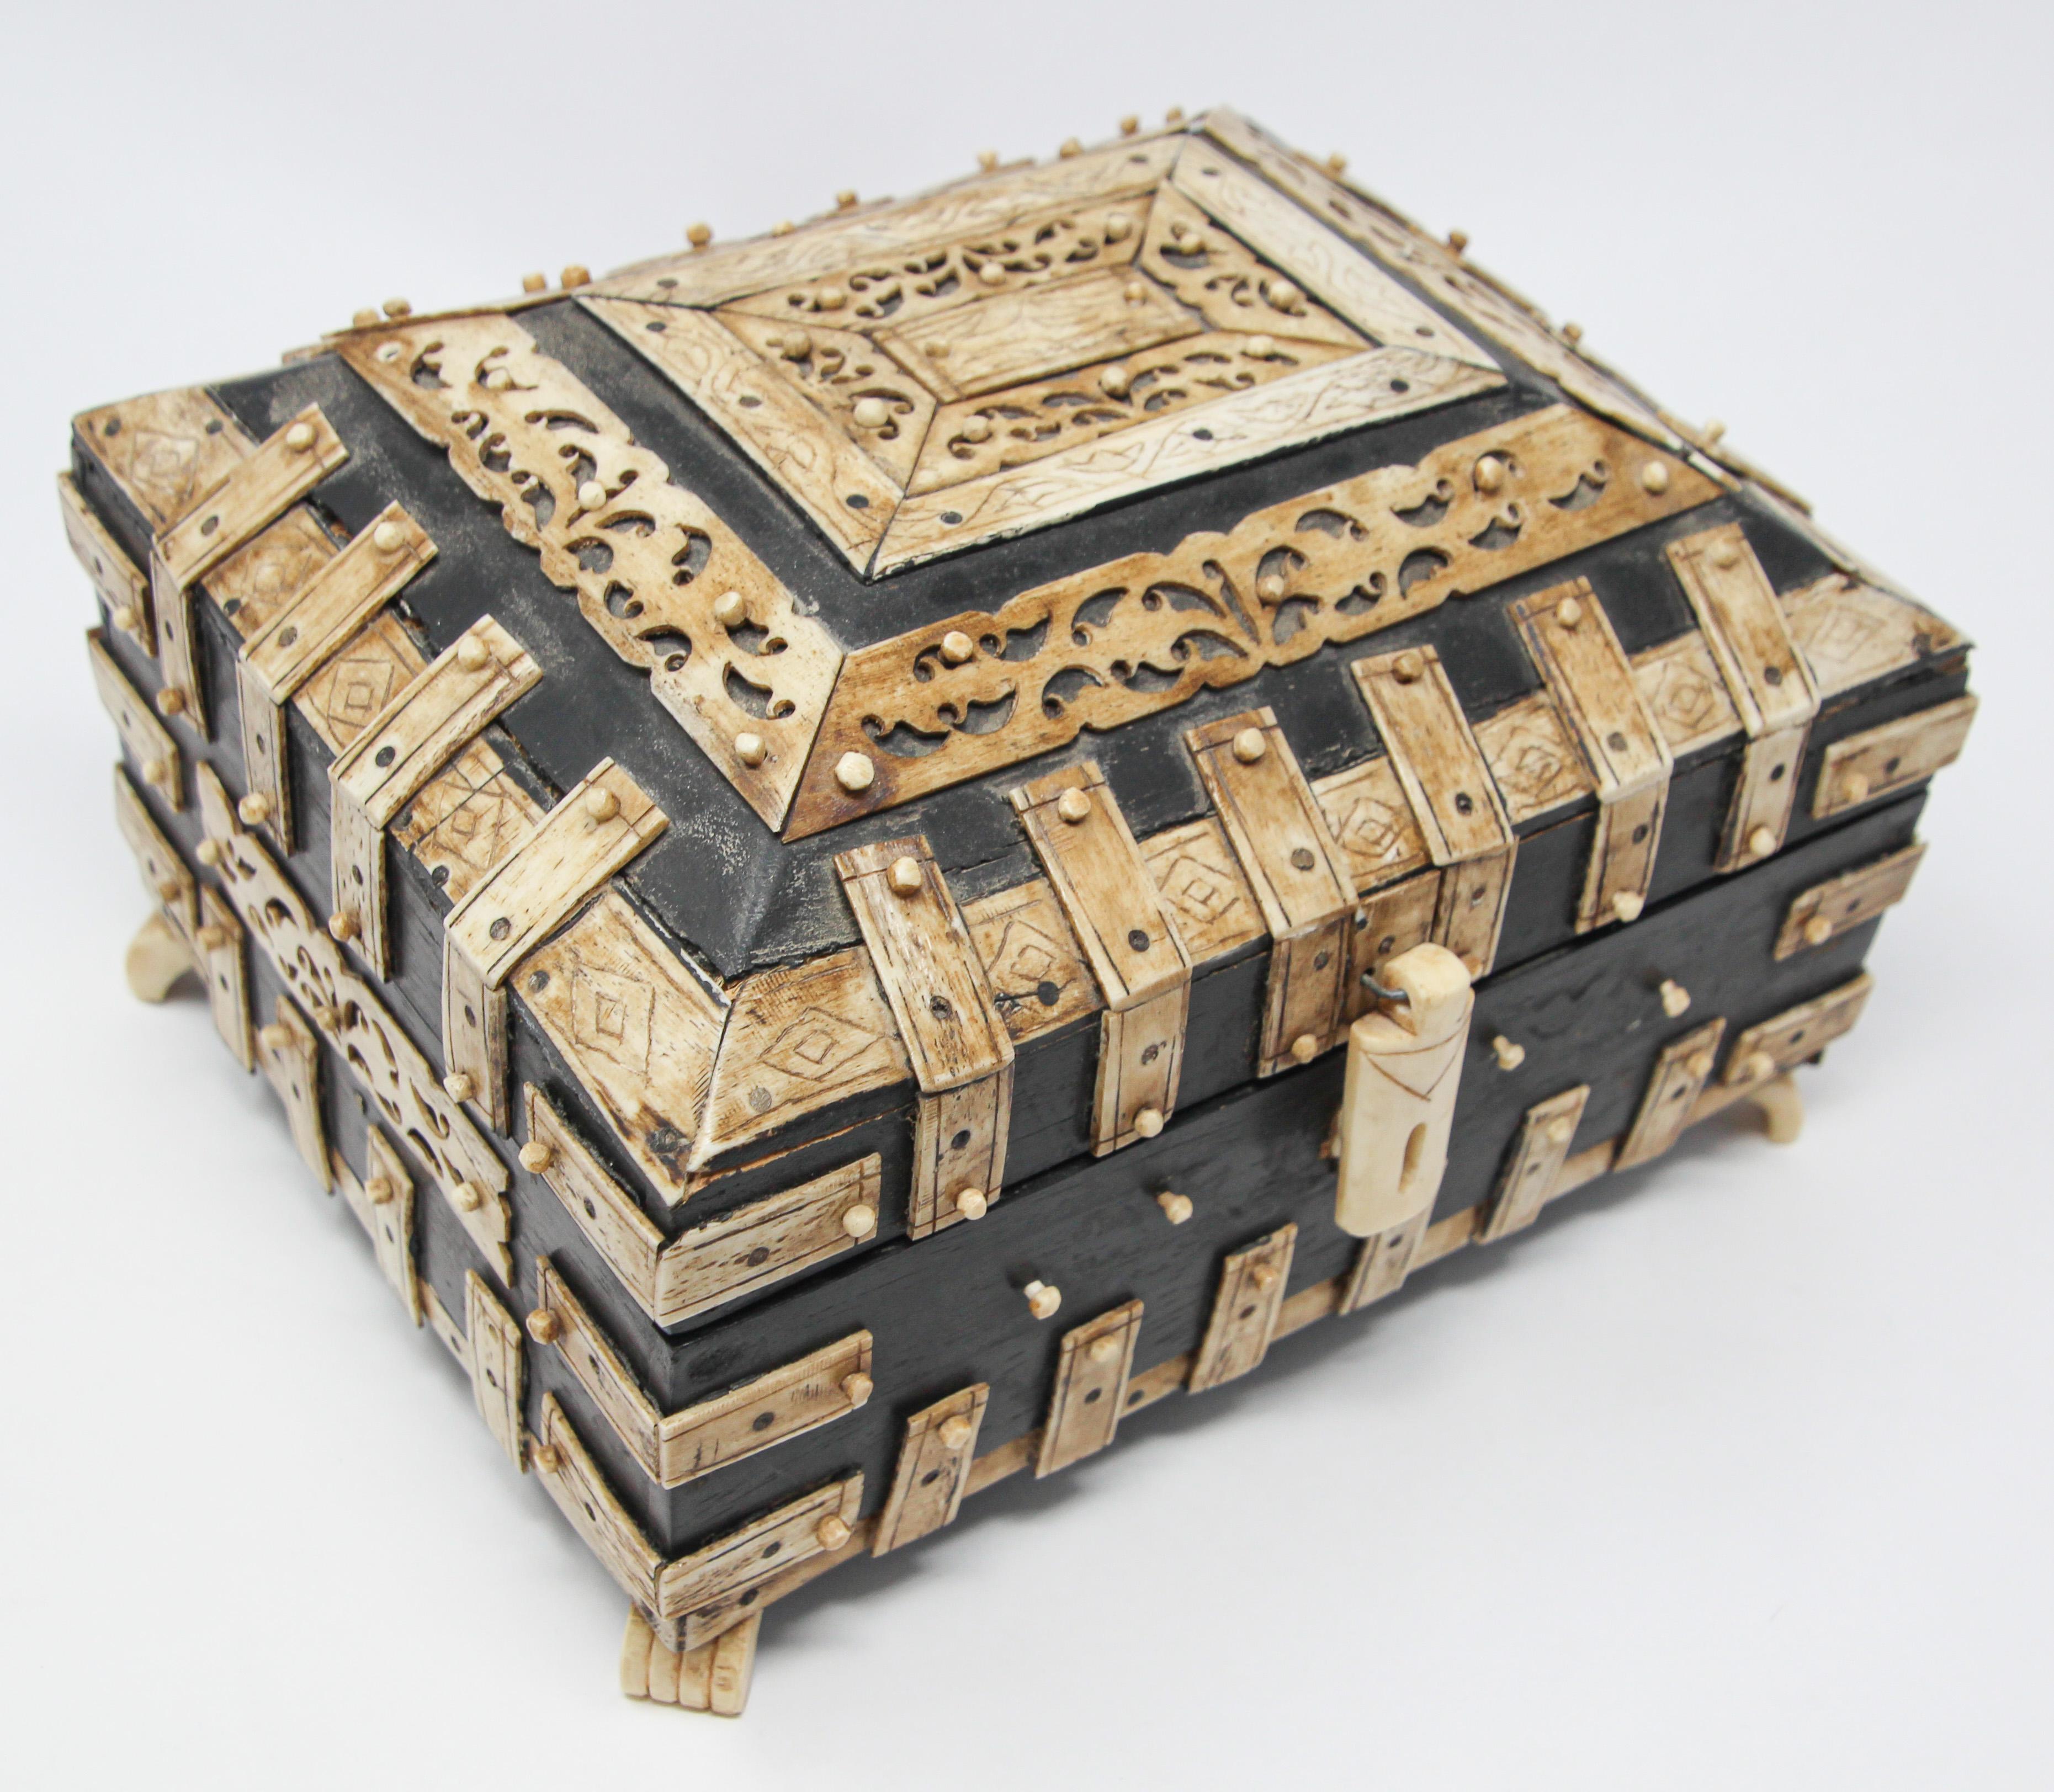 Antique 19th c. Decorative Anglo-Indian Overlay Footed Box with Engraved Bone For Sale 9